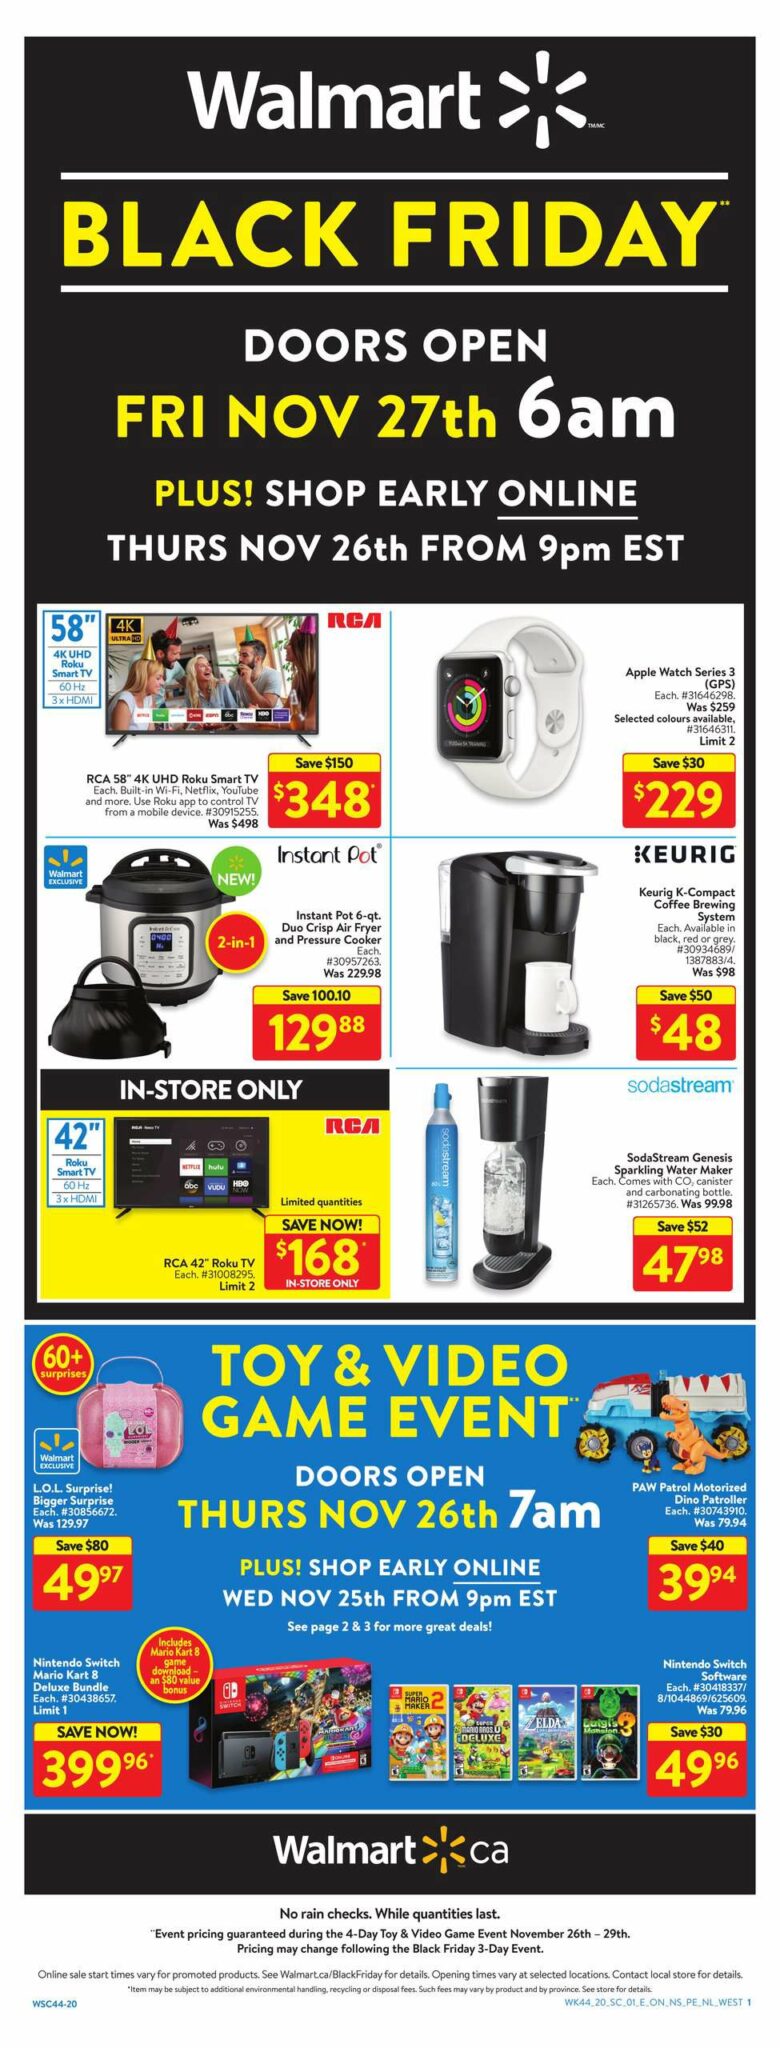 Walmart Black Friday Flyer Deals 2020 Canada - Will Rockler Black Friday Deals Be Available Online